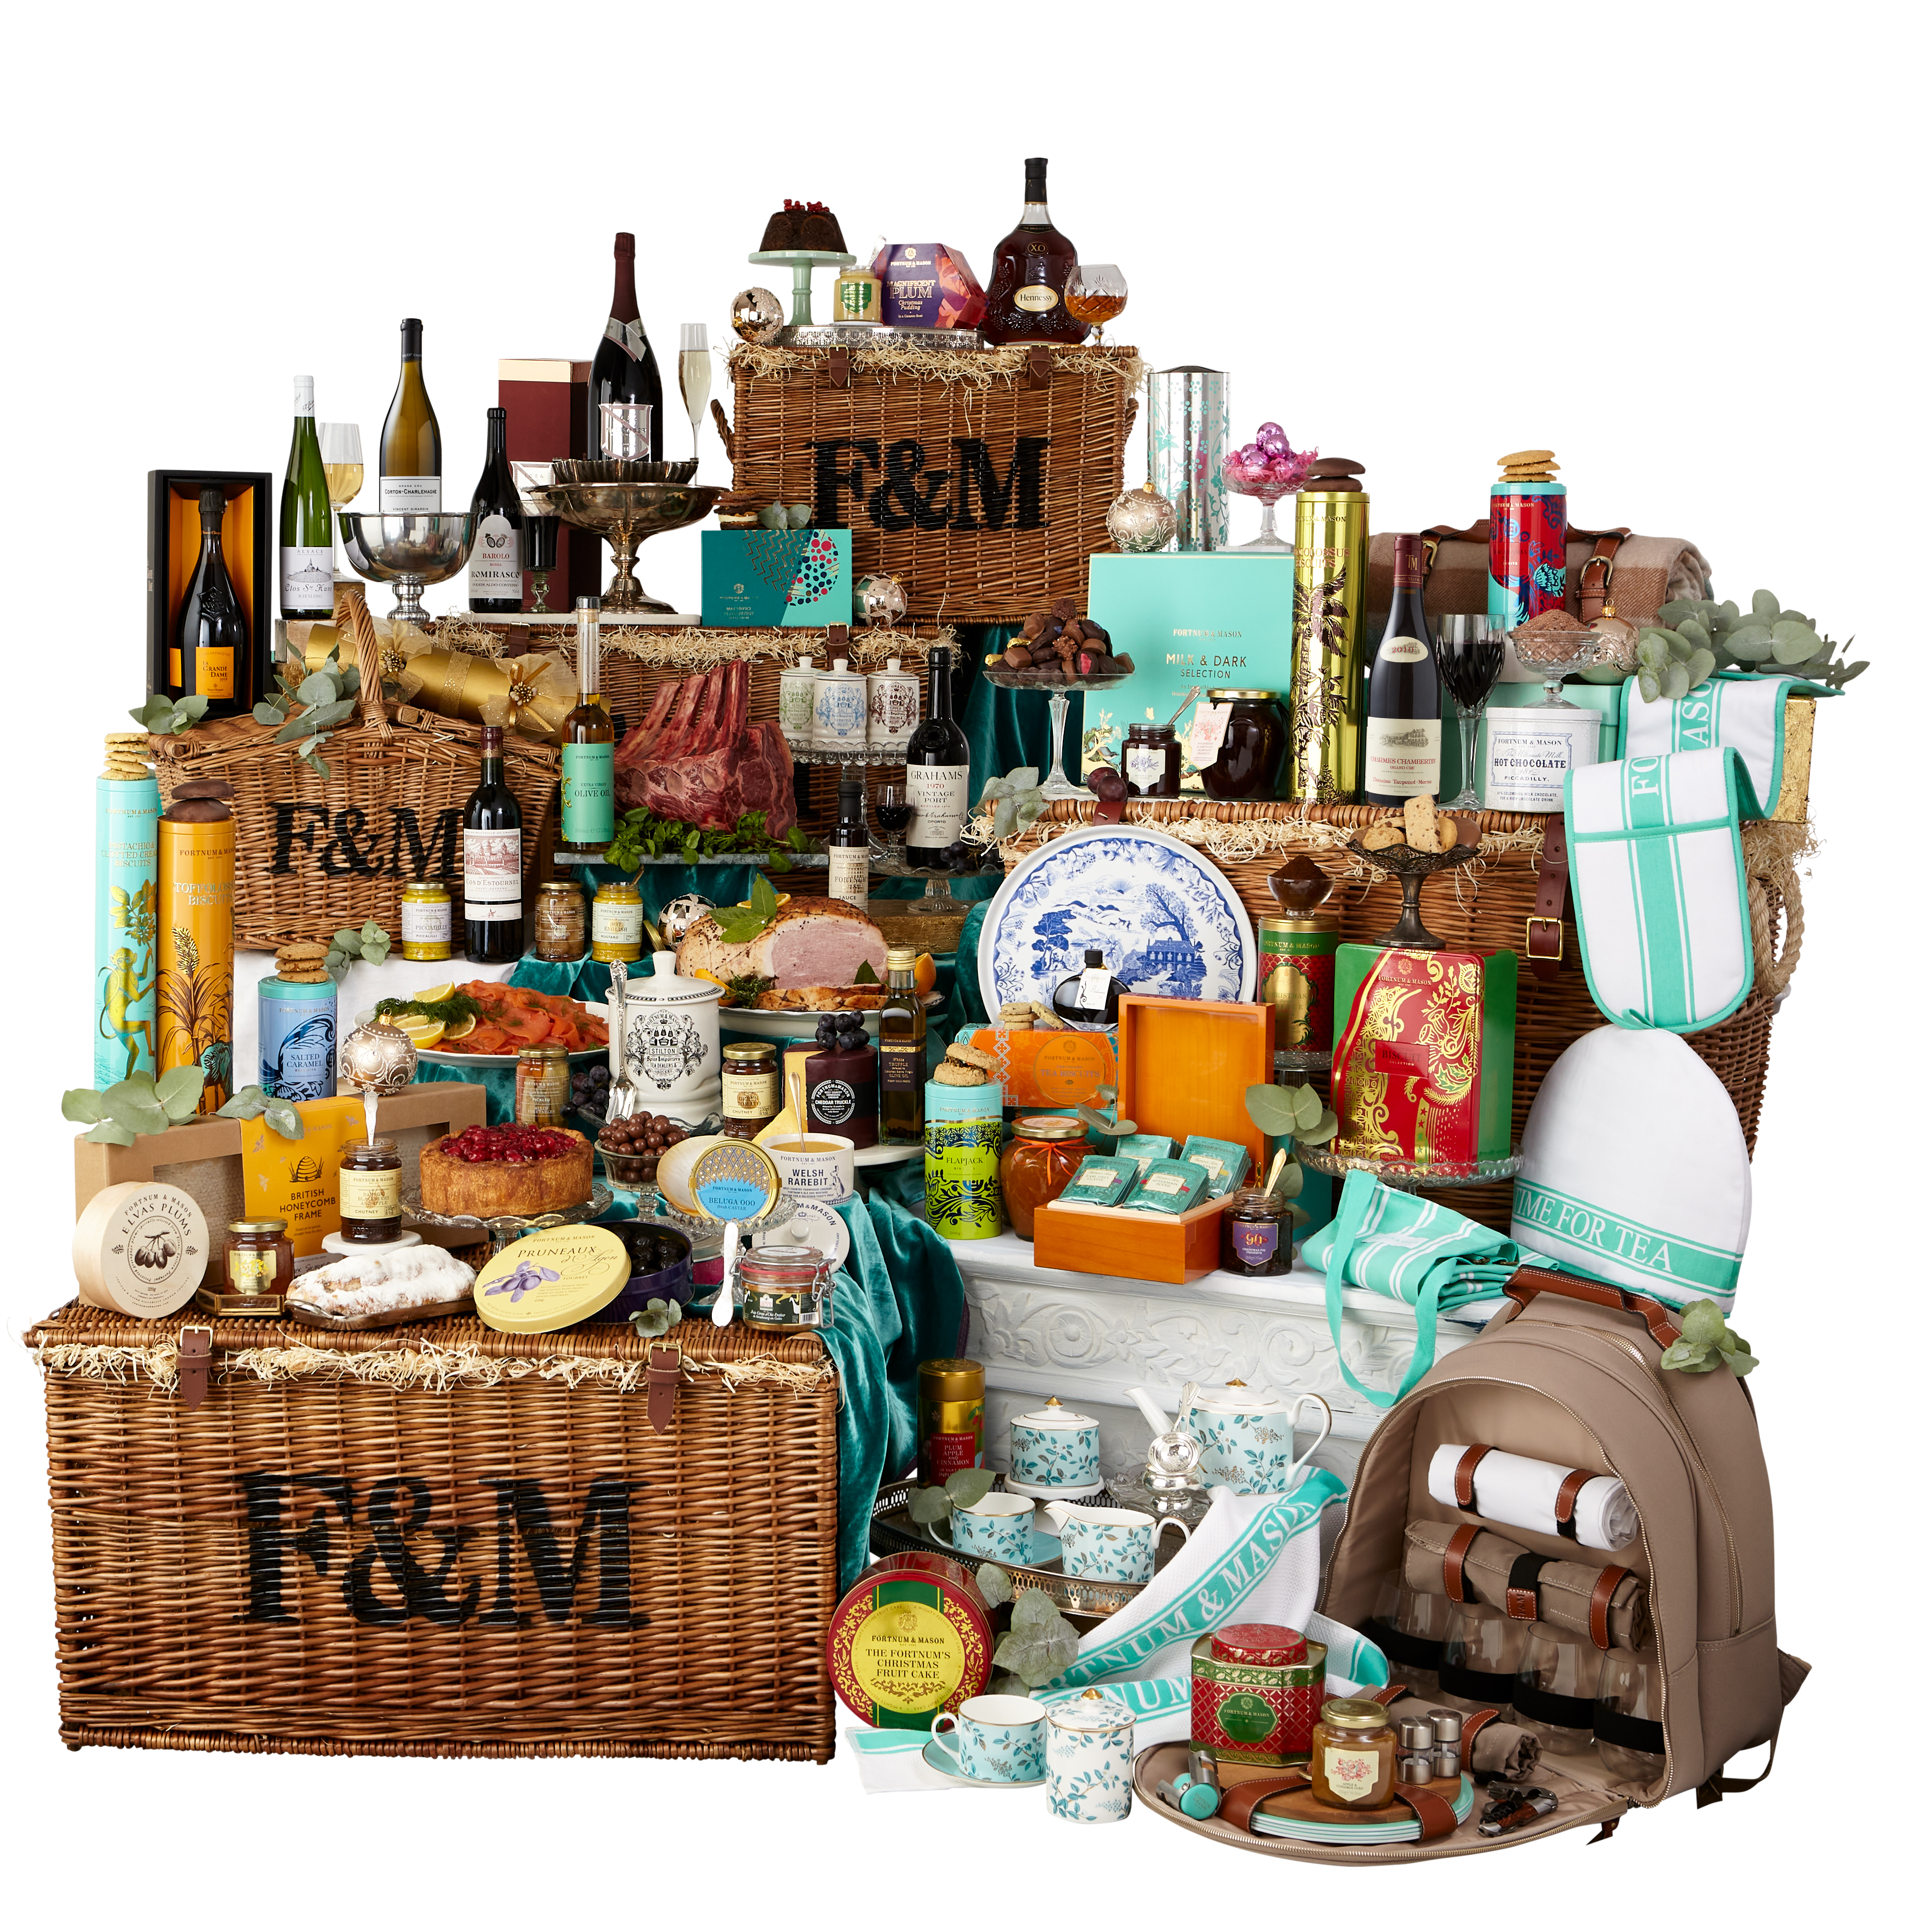 Season’s eatings: Discover the top festive hampers of 2020